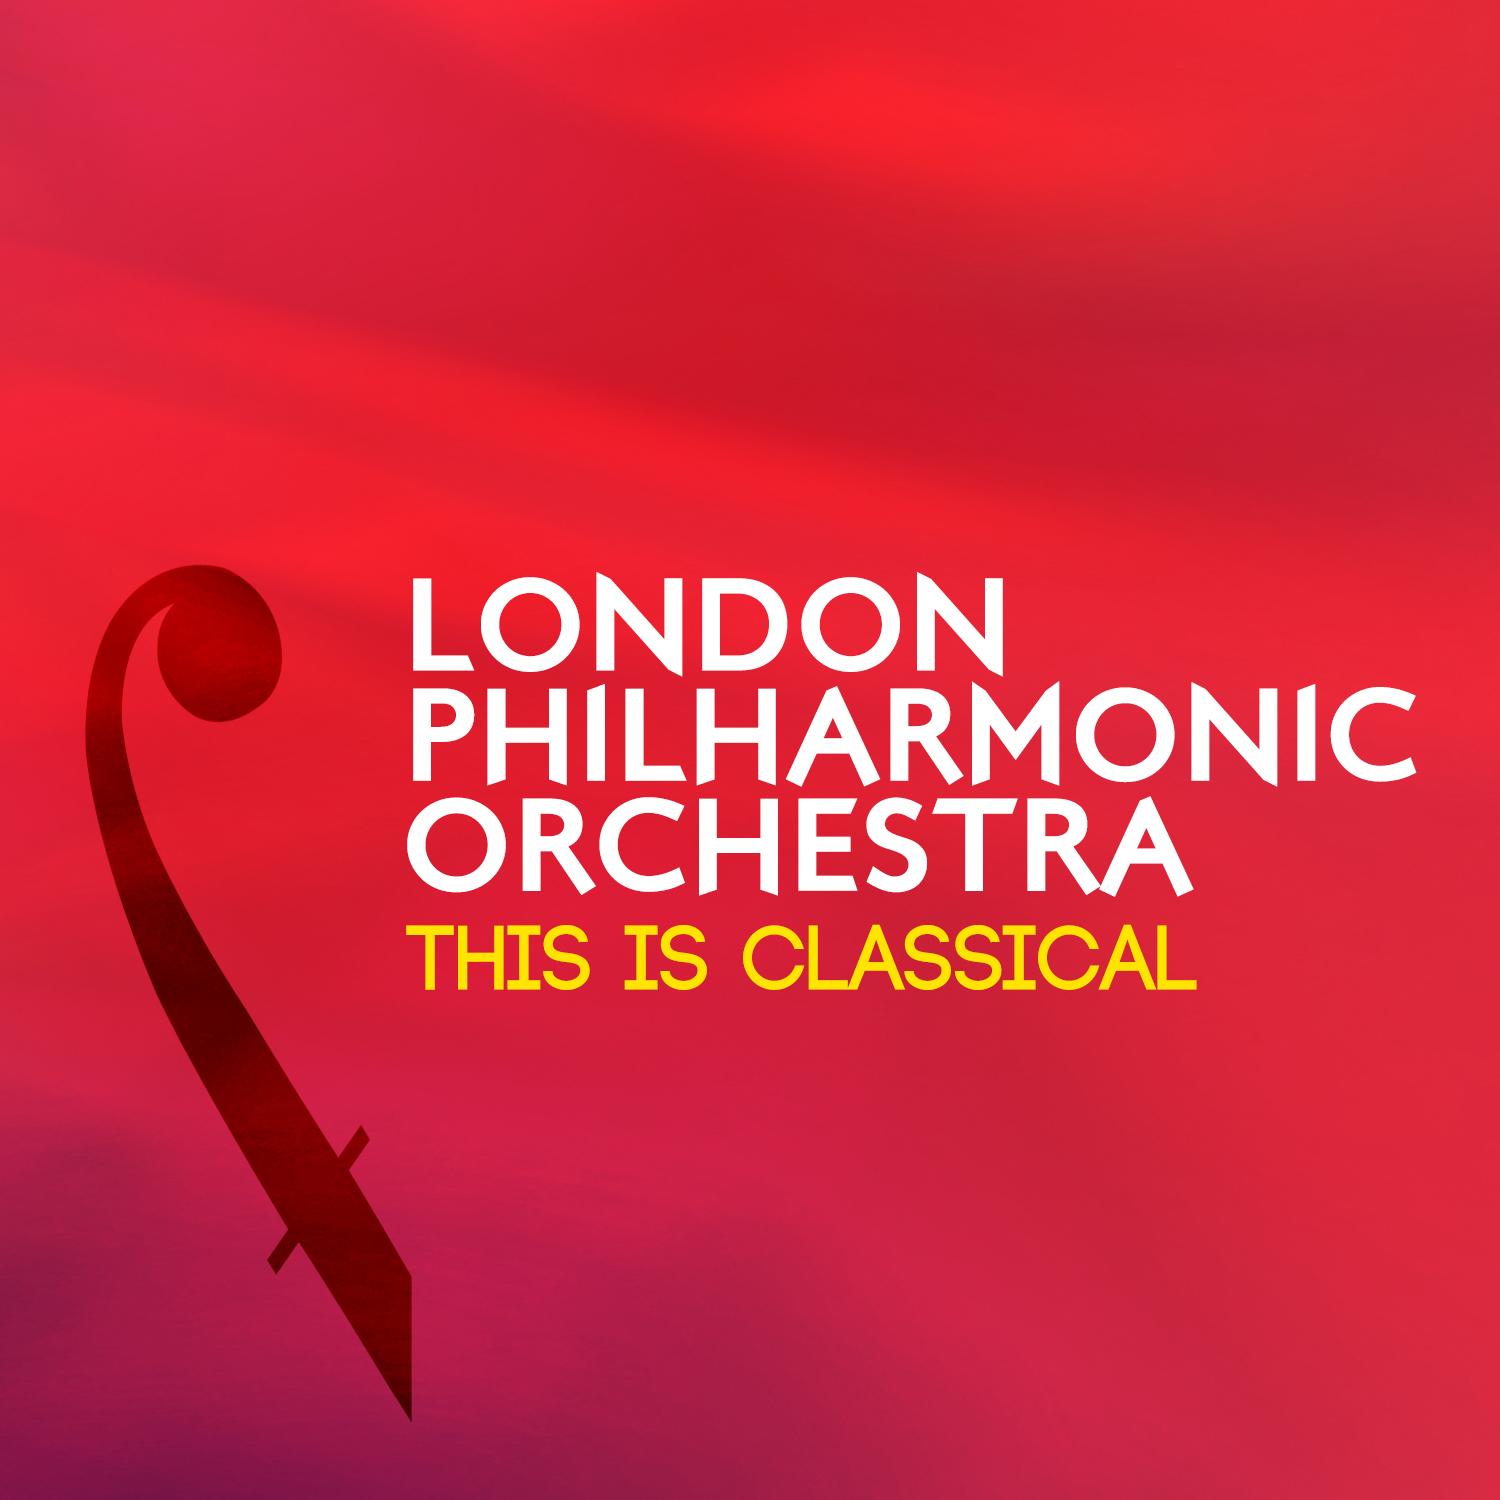 London Philharmonic Orchestra: This Is Classical